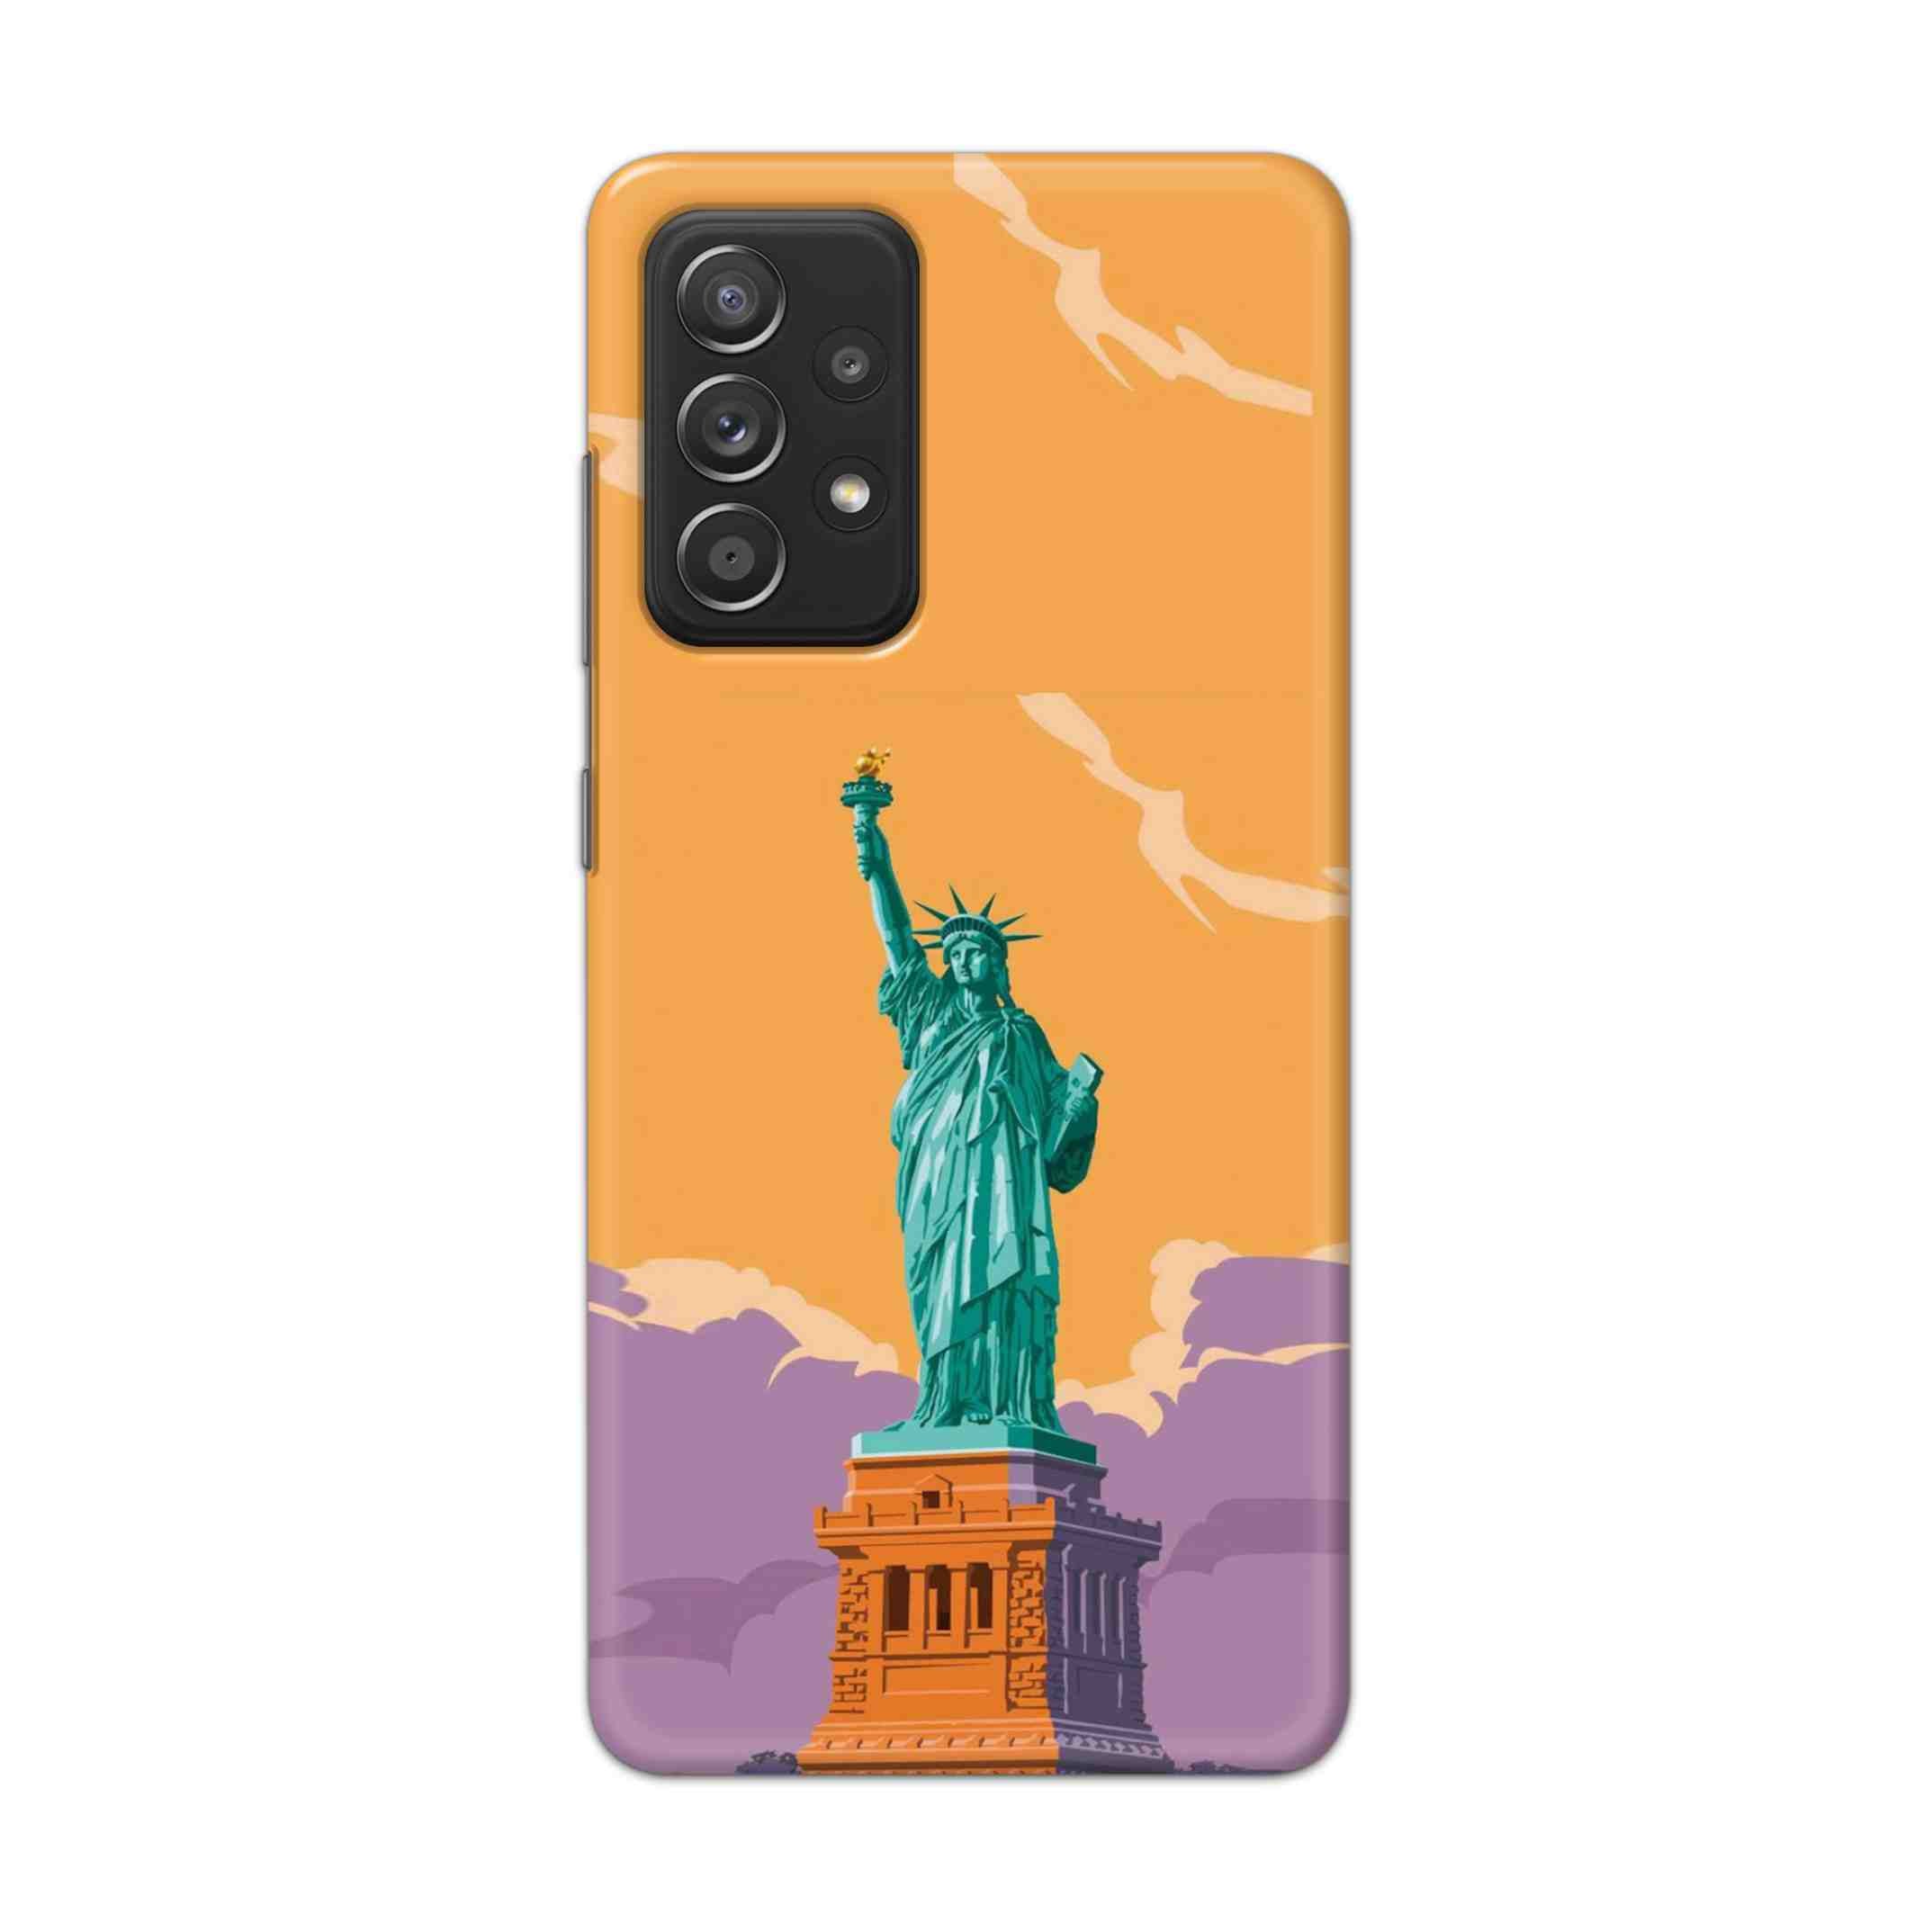 Buy Statue Of Liberty Hard Back Mobile Phone Case Cover For Samsung Galaxy A52 Online